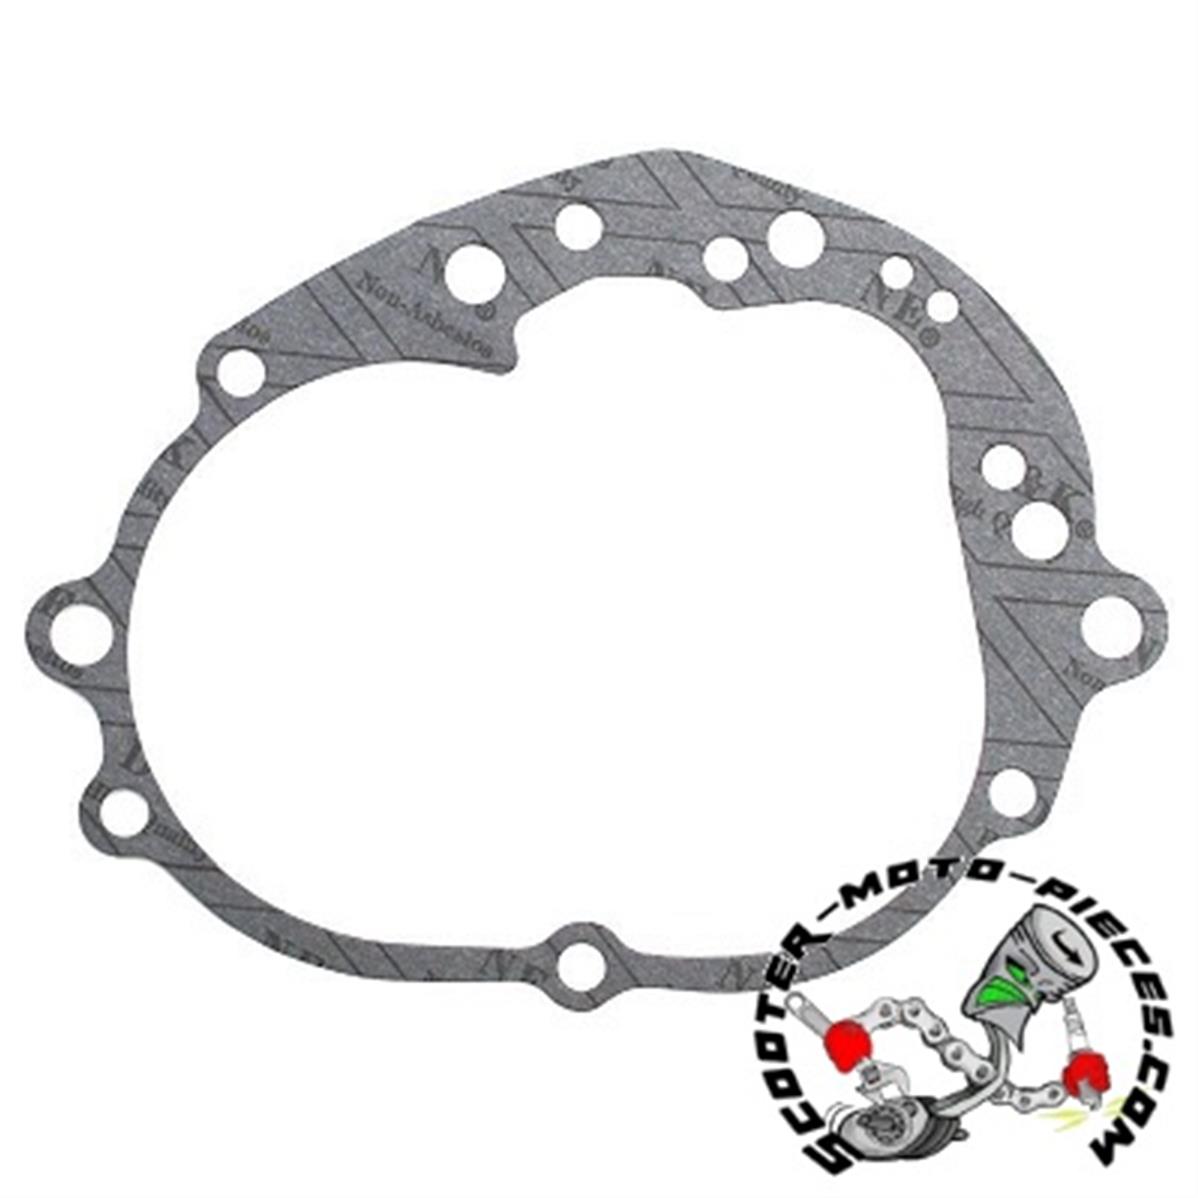 https://www.scooter-moto-pieces.com/Files/132845/Img/04/joint_carter_transmission_ludix-zx1200.jpg